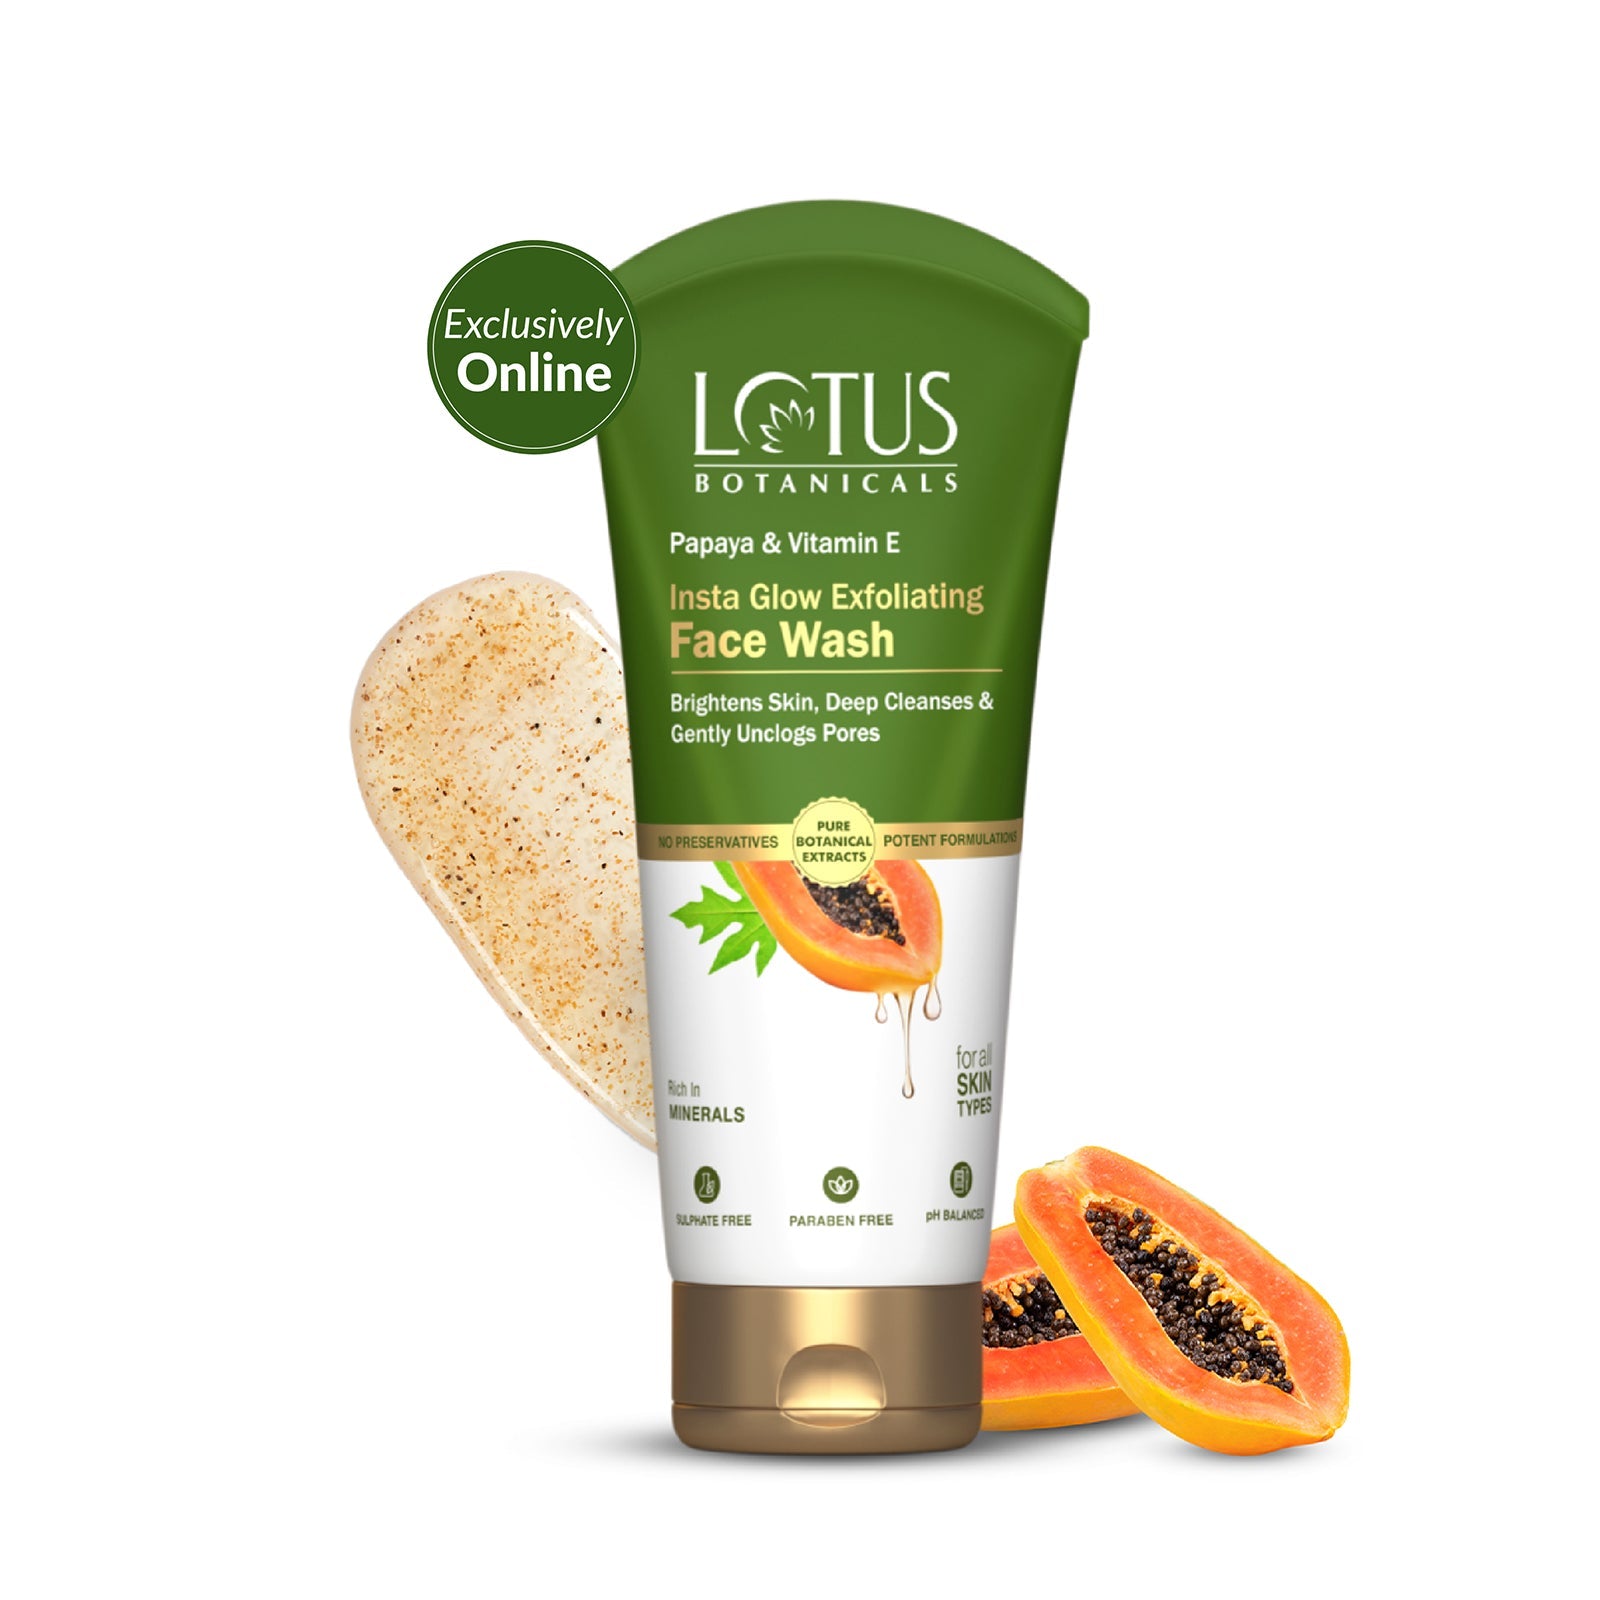 Papaya & Vitamin E Insta Glow Exfoliating Facewash - Revitalize your skin with the power of papaya and Vitamin E. Experience an instant glow and a smooth, renewed complexion with our exfoliating facewash.